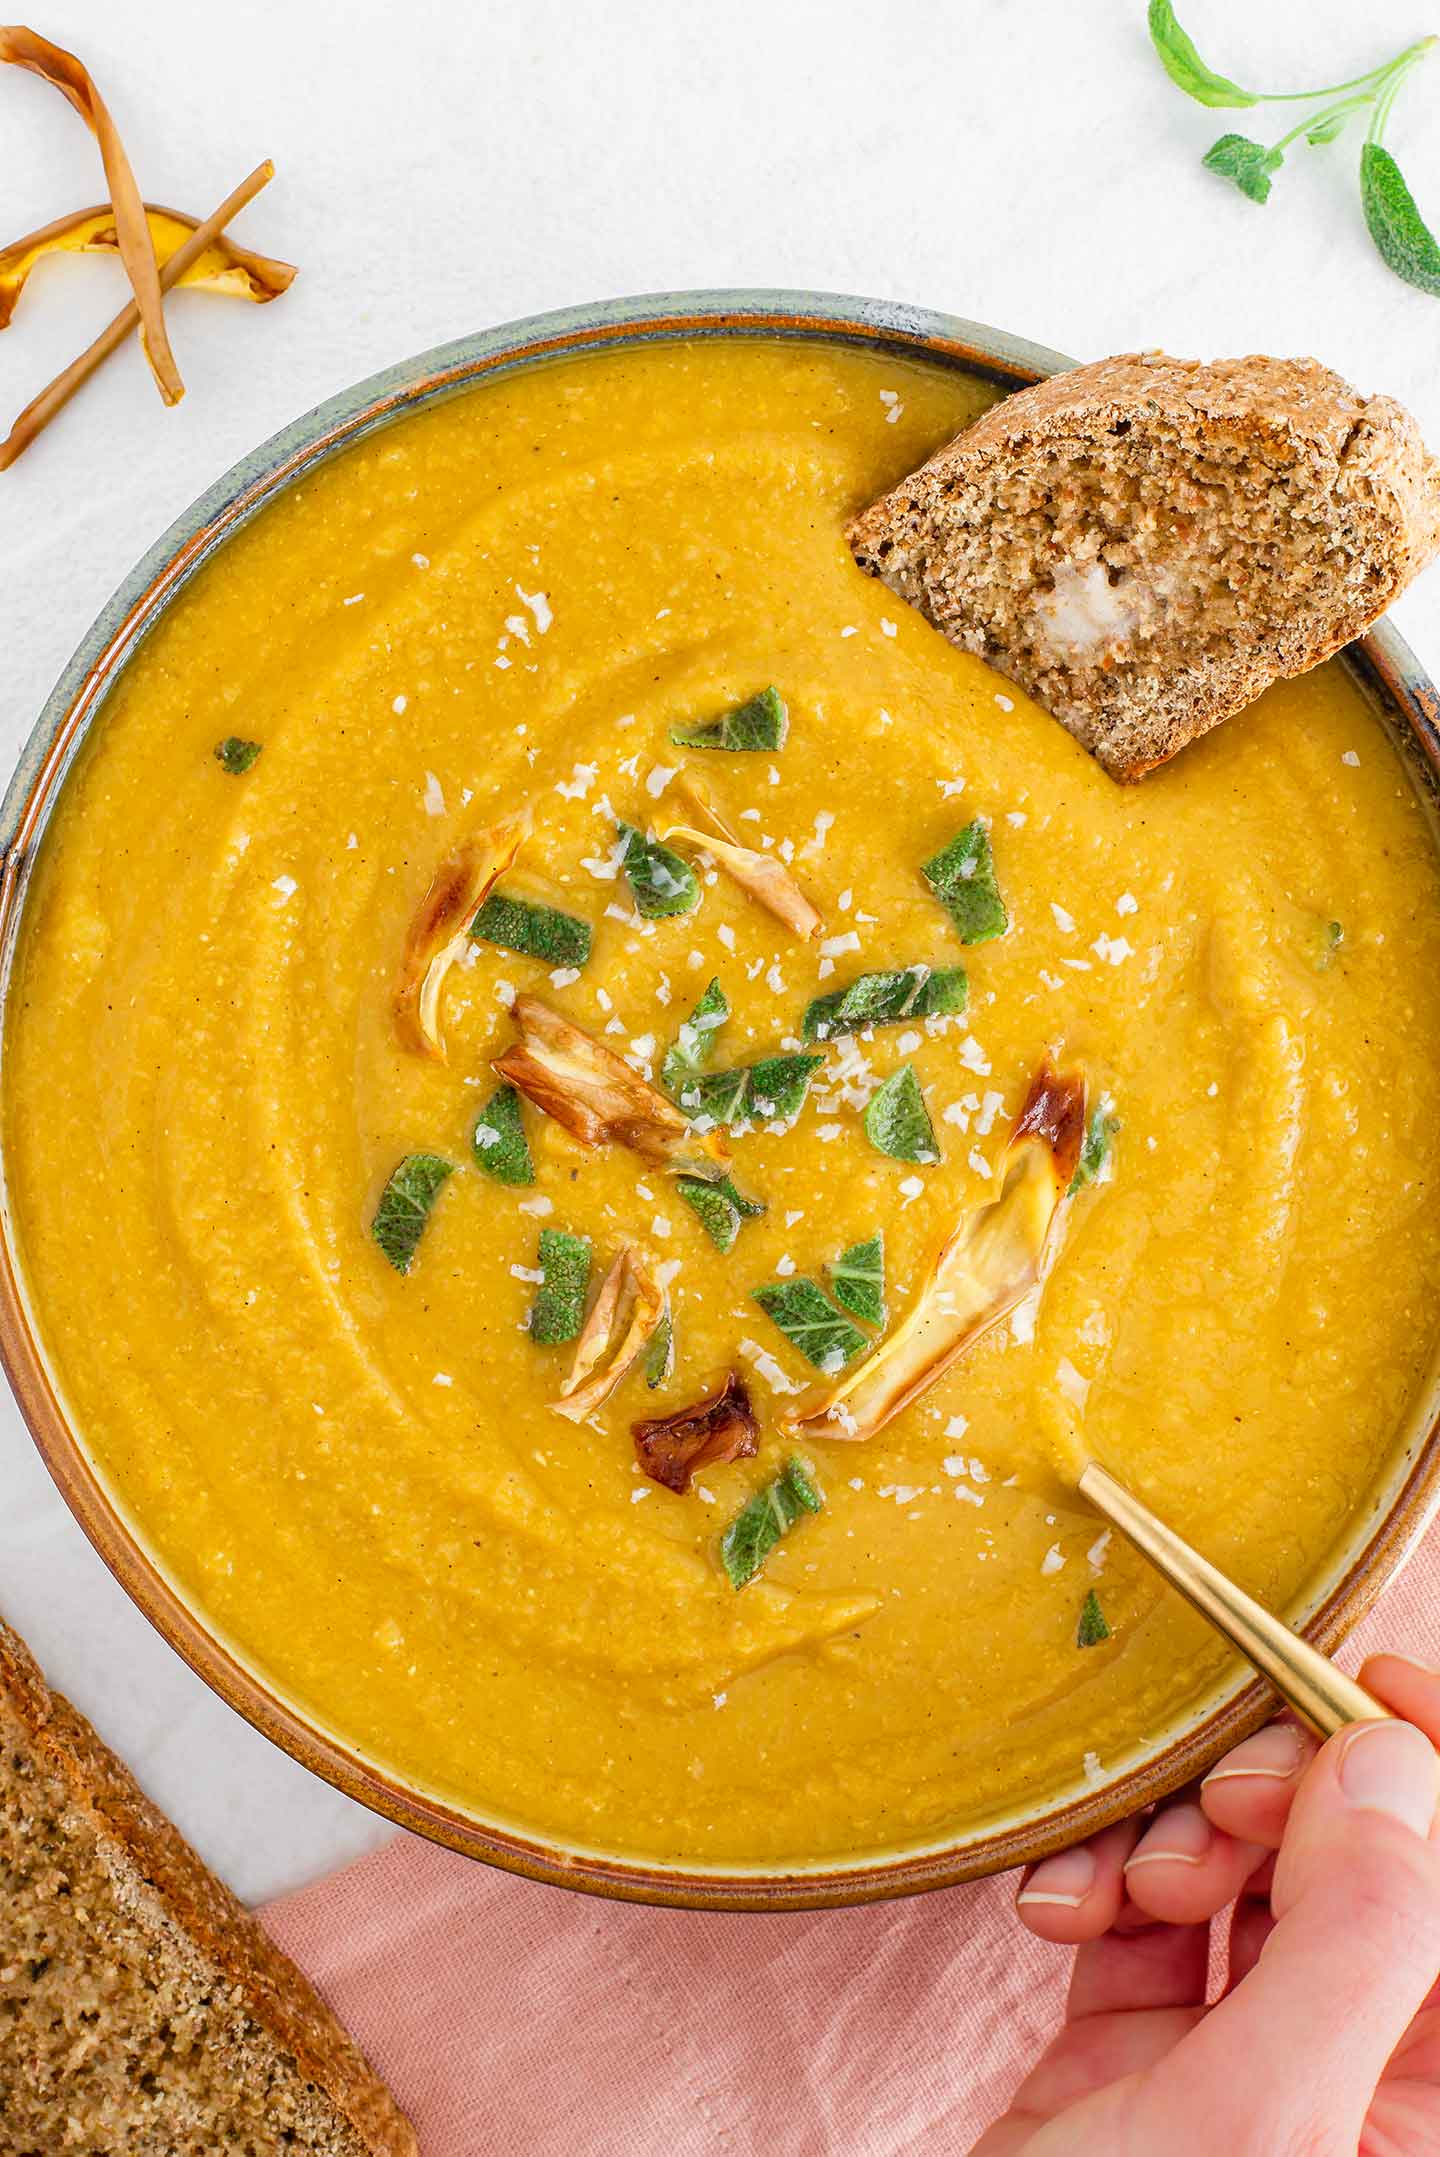 Top down view of a hand dipping a spoon into butternut squash red lentil soup. A buttered piece of whole wheat bread rests in the soup.